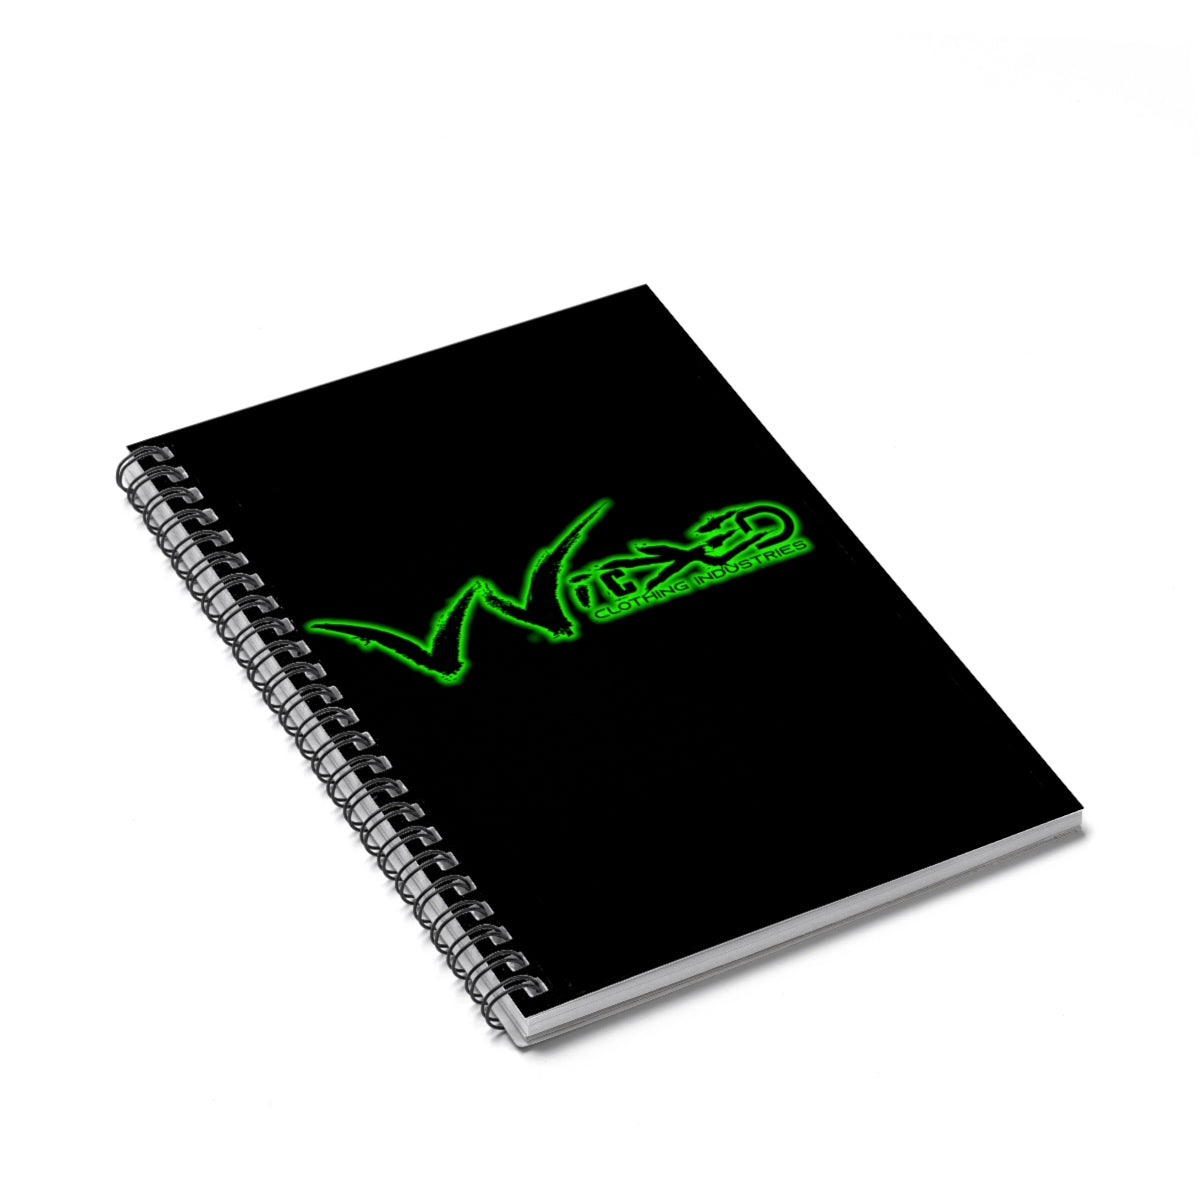 Crazy Wicked Spiral Notebook - Ruled Line